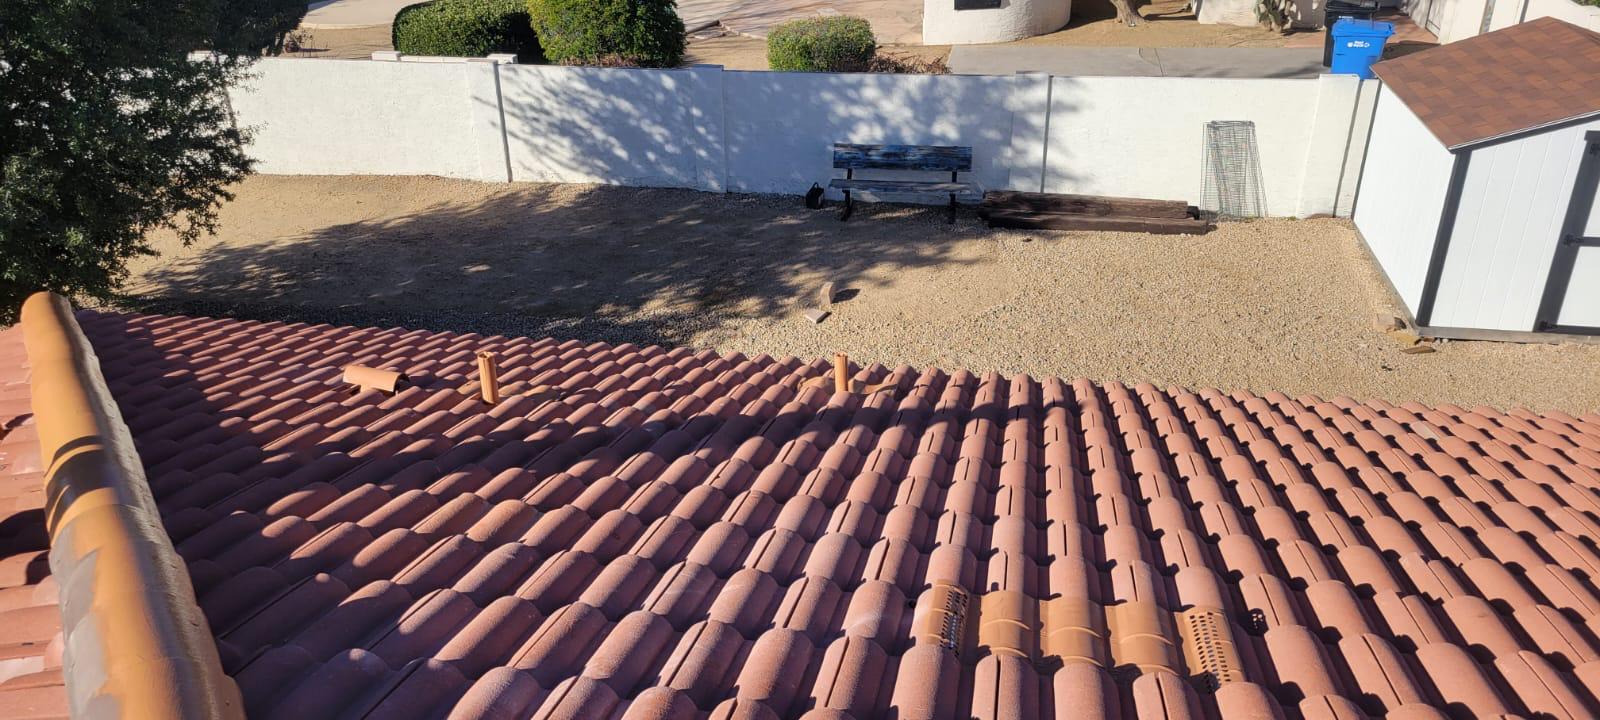 A dedicated Behmer Roofing employee focusing on superior tile re-felting to protect North Phoenix homes.